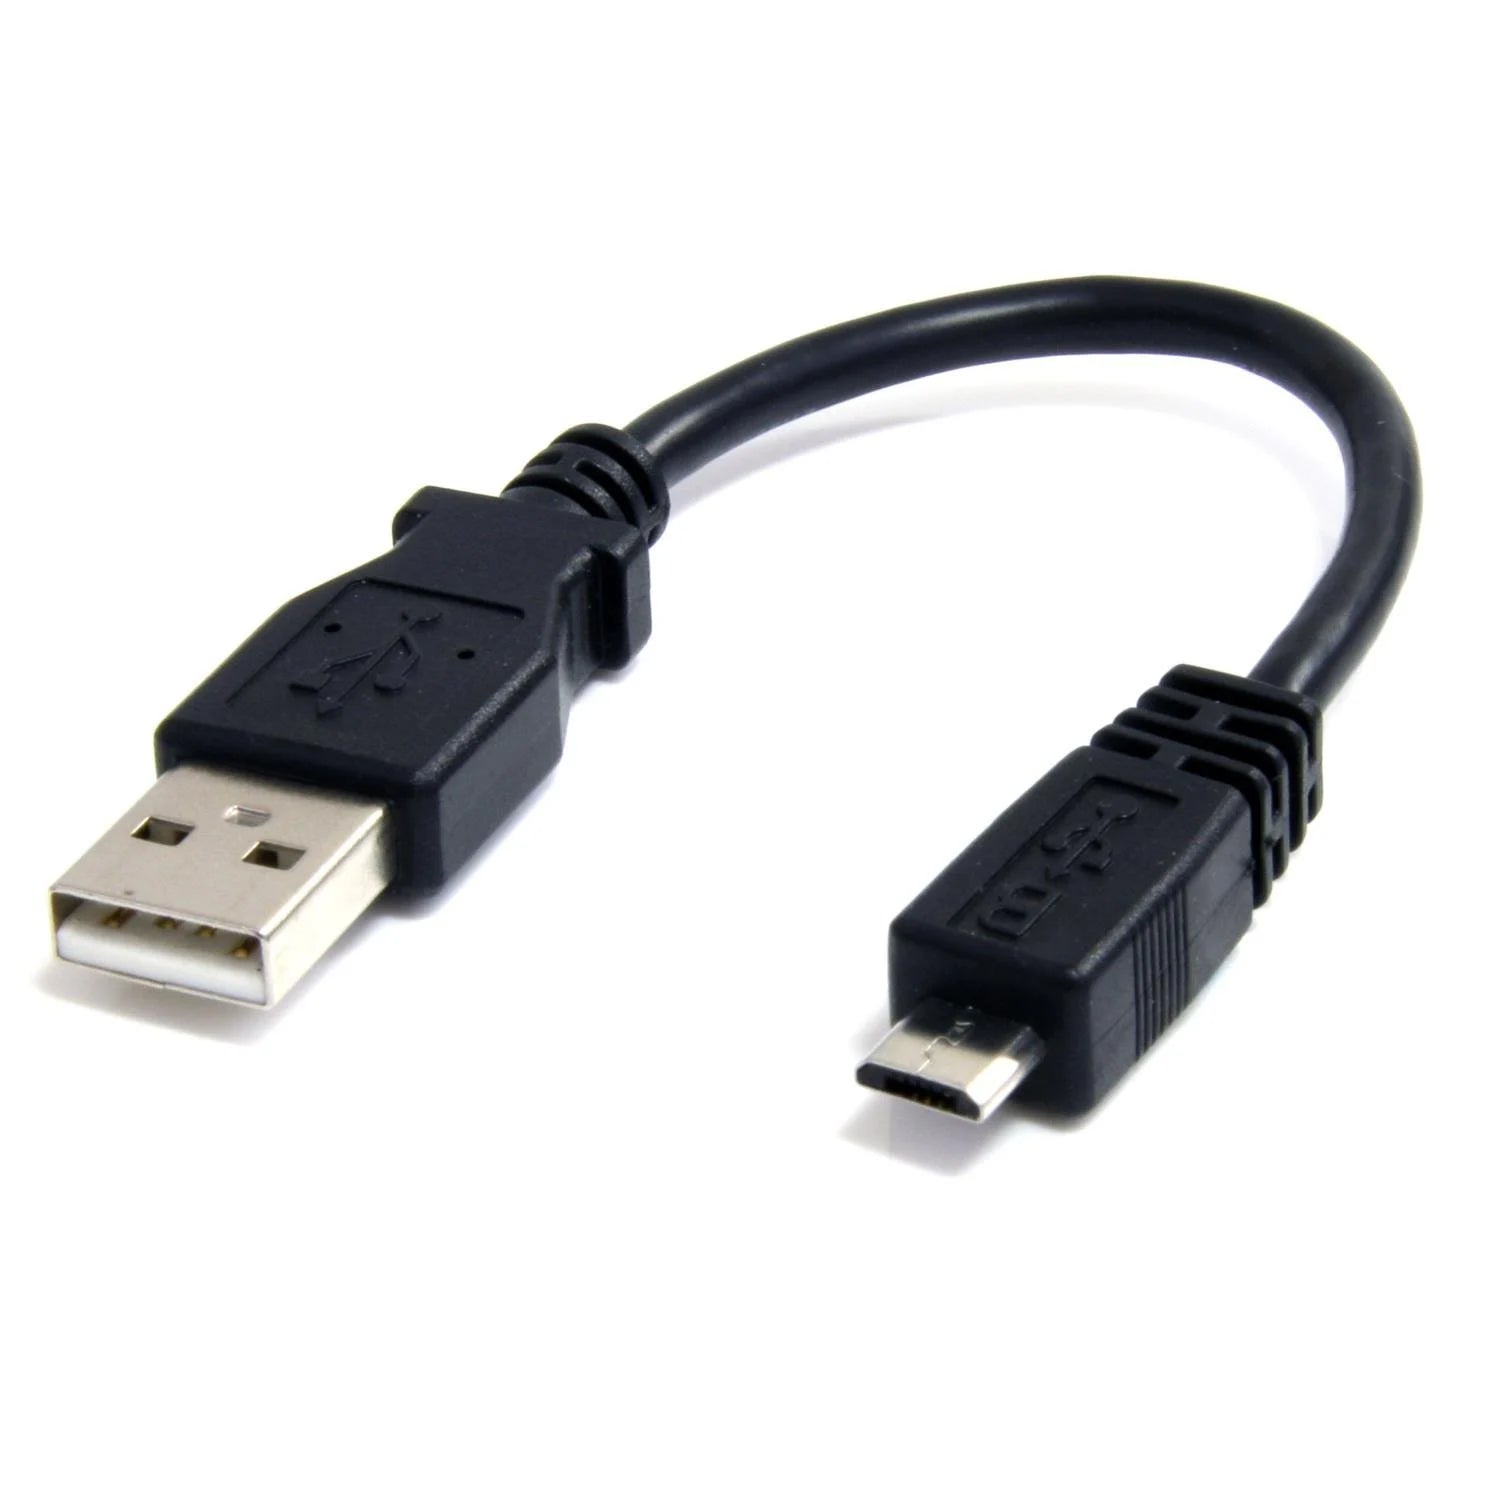 Micro USB-A to Micro-B Cable -45cm